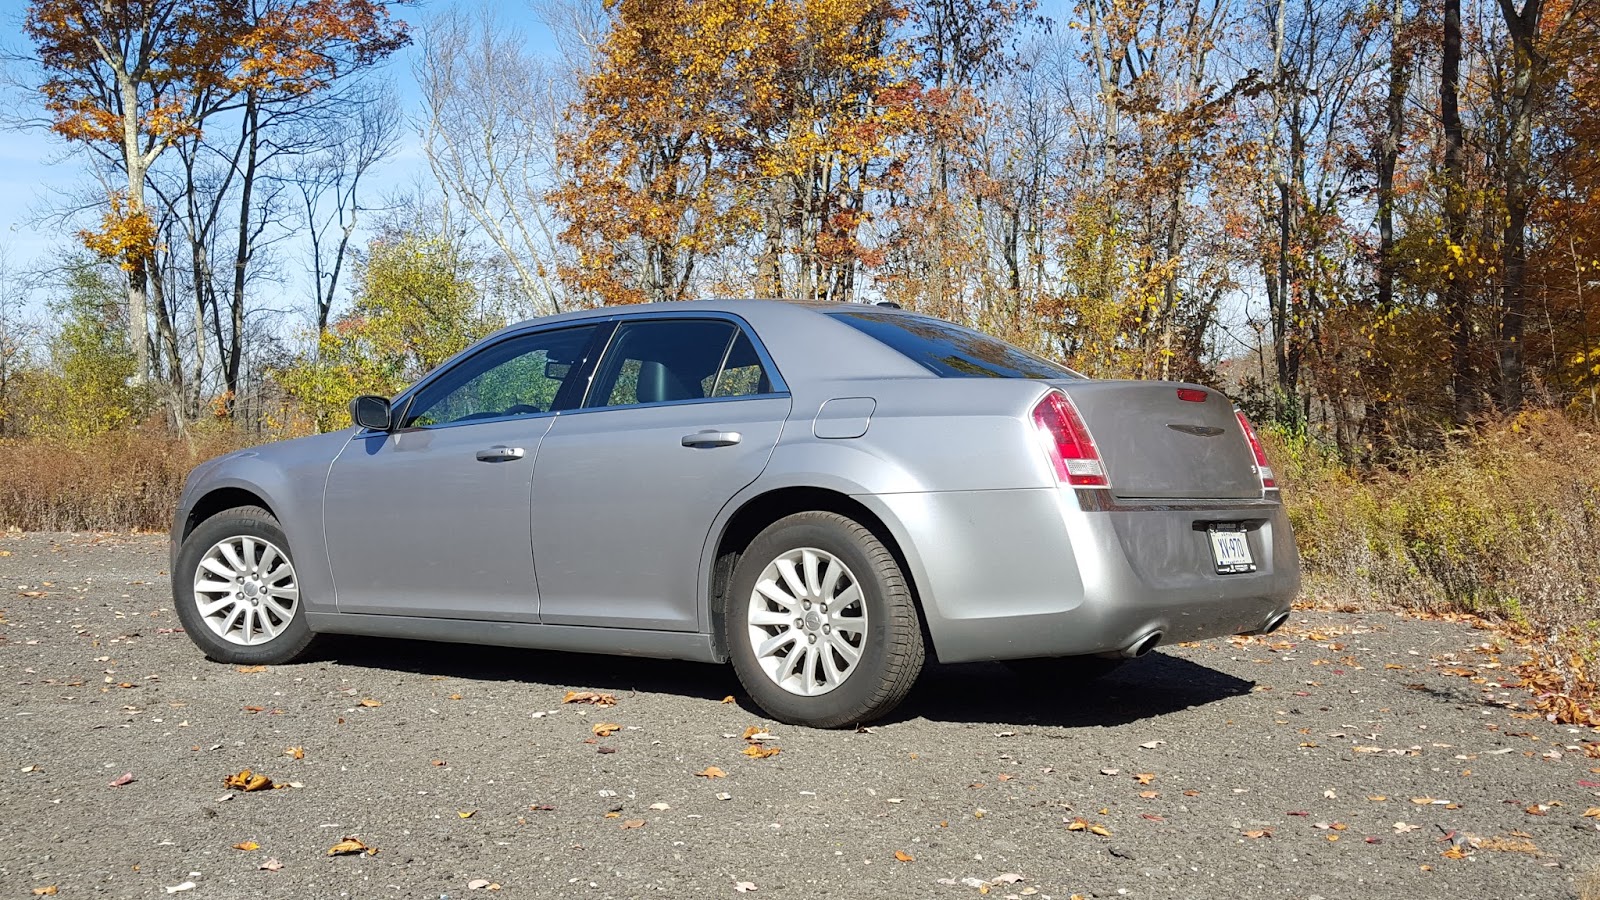 Roody's reviews, thoughts and ramblings: Rental Review: 2014 Chrysler 300